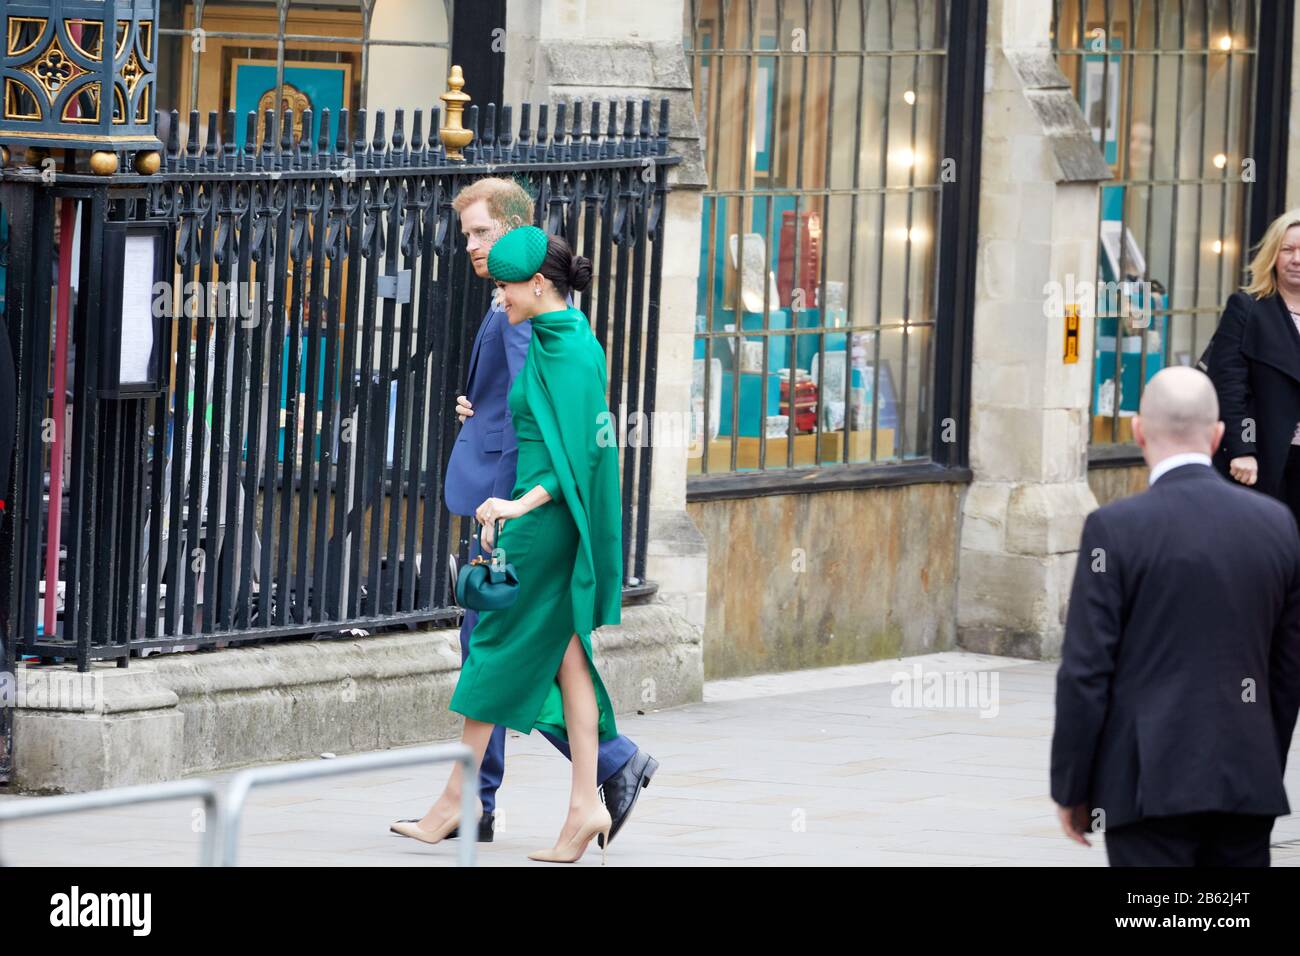 London, U.K. - 9 Mar 2020: The Duke and Duchess of Sussex arriving for the Commonwealth Day Service at Westminster Abbey on their last day of public royal duties. Stock Photo